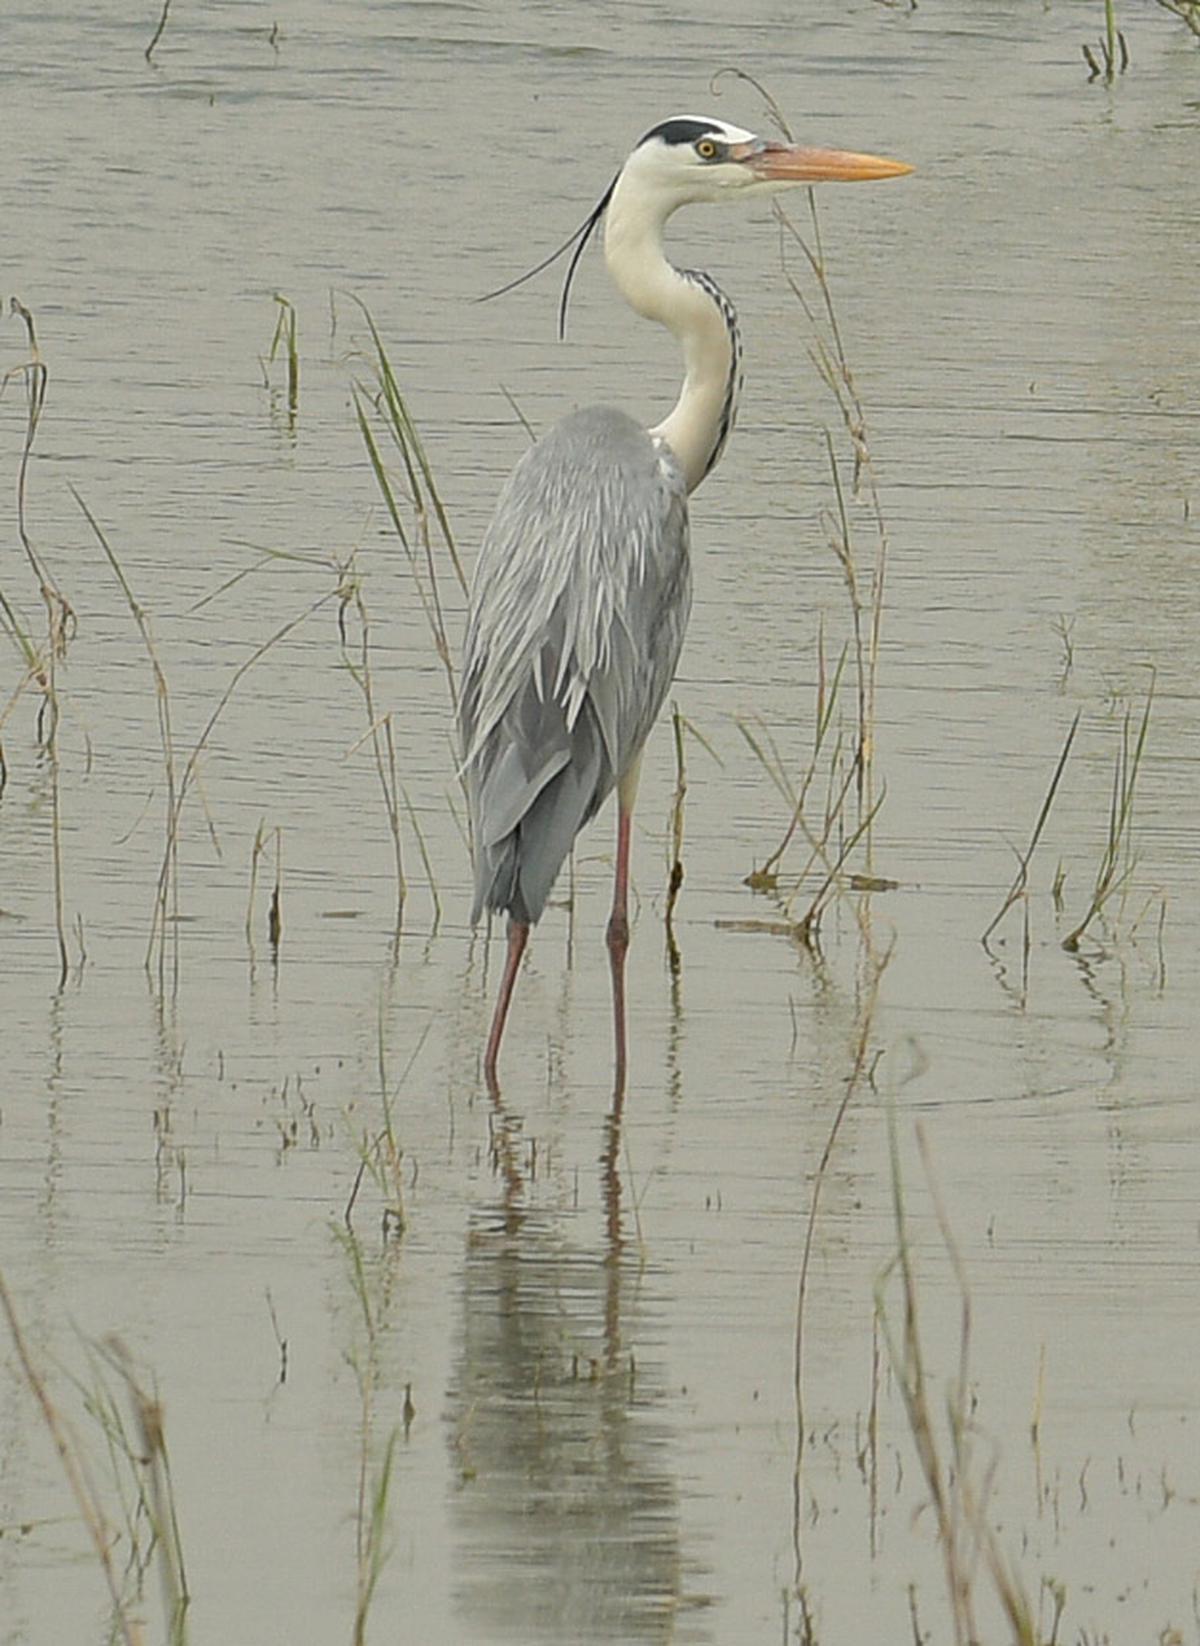 Grey Heron, Â a long-legged wading bird of the heron family, Ardeidae, native throughout temperate Europe and Asia, and also parts of Africa, seen at Karaivetti.